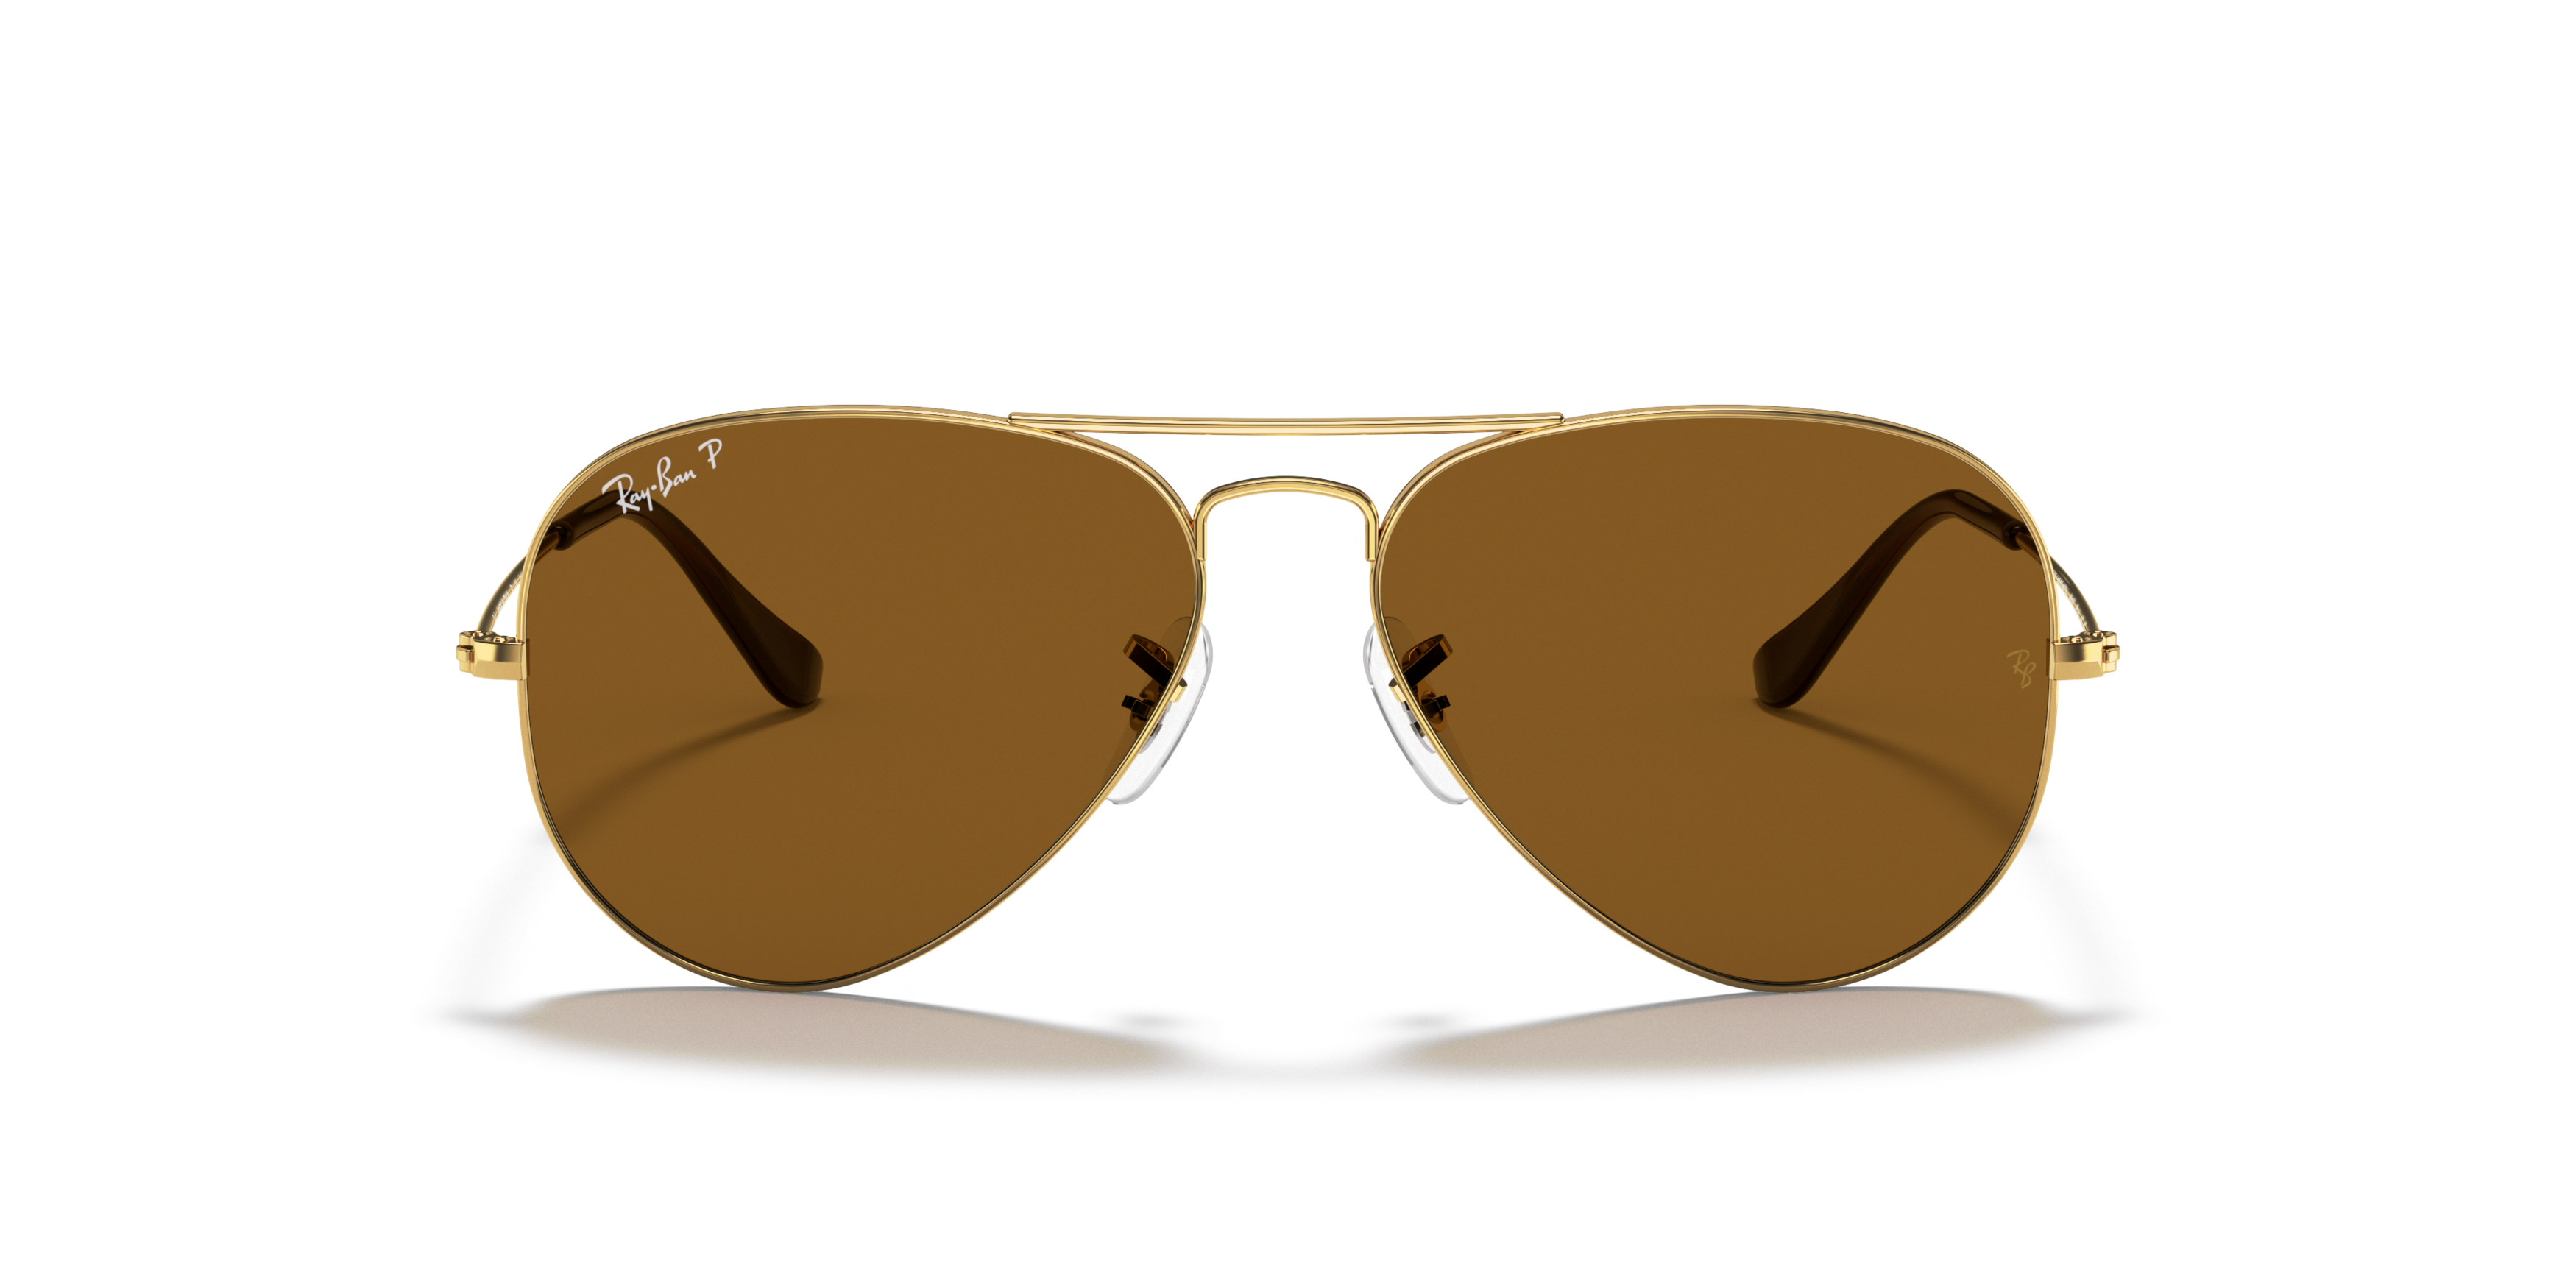 [products.image.front] Ray-Ban Aviator Classic RB3025 001/57